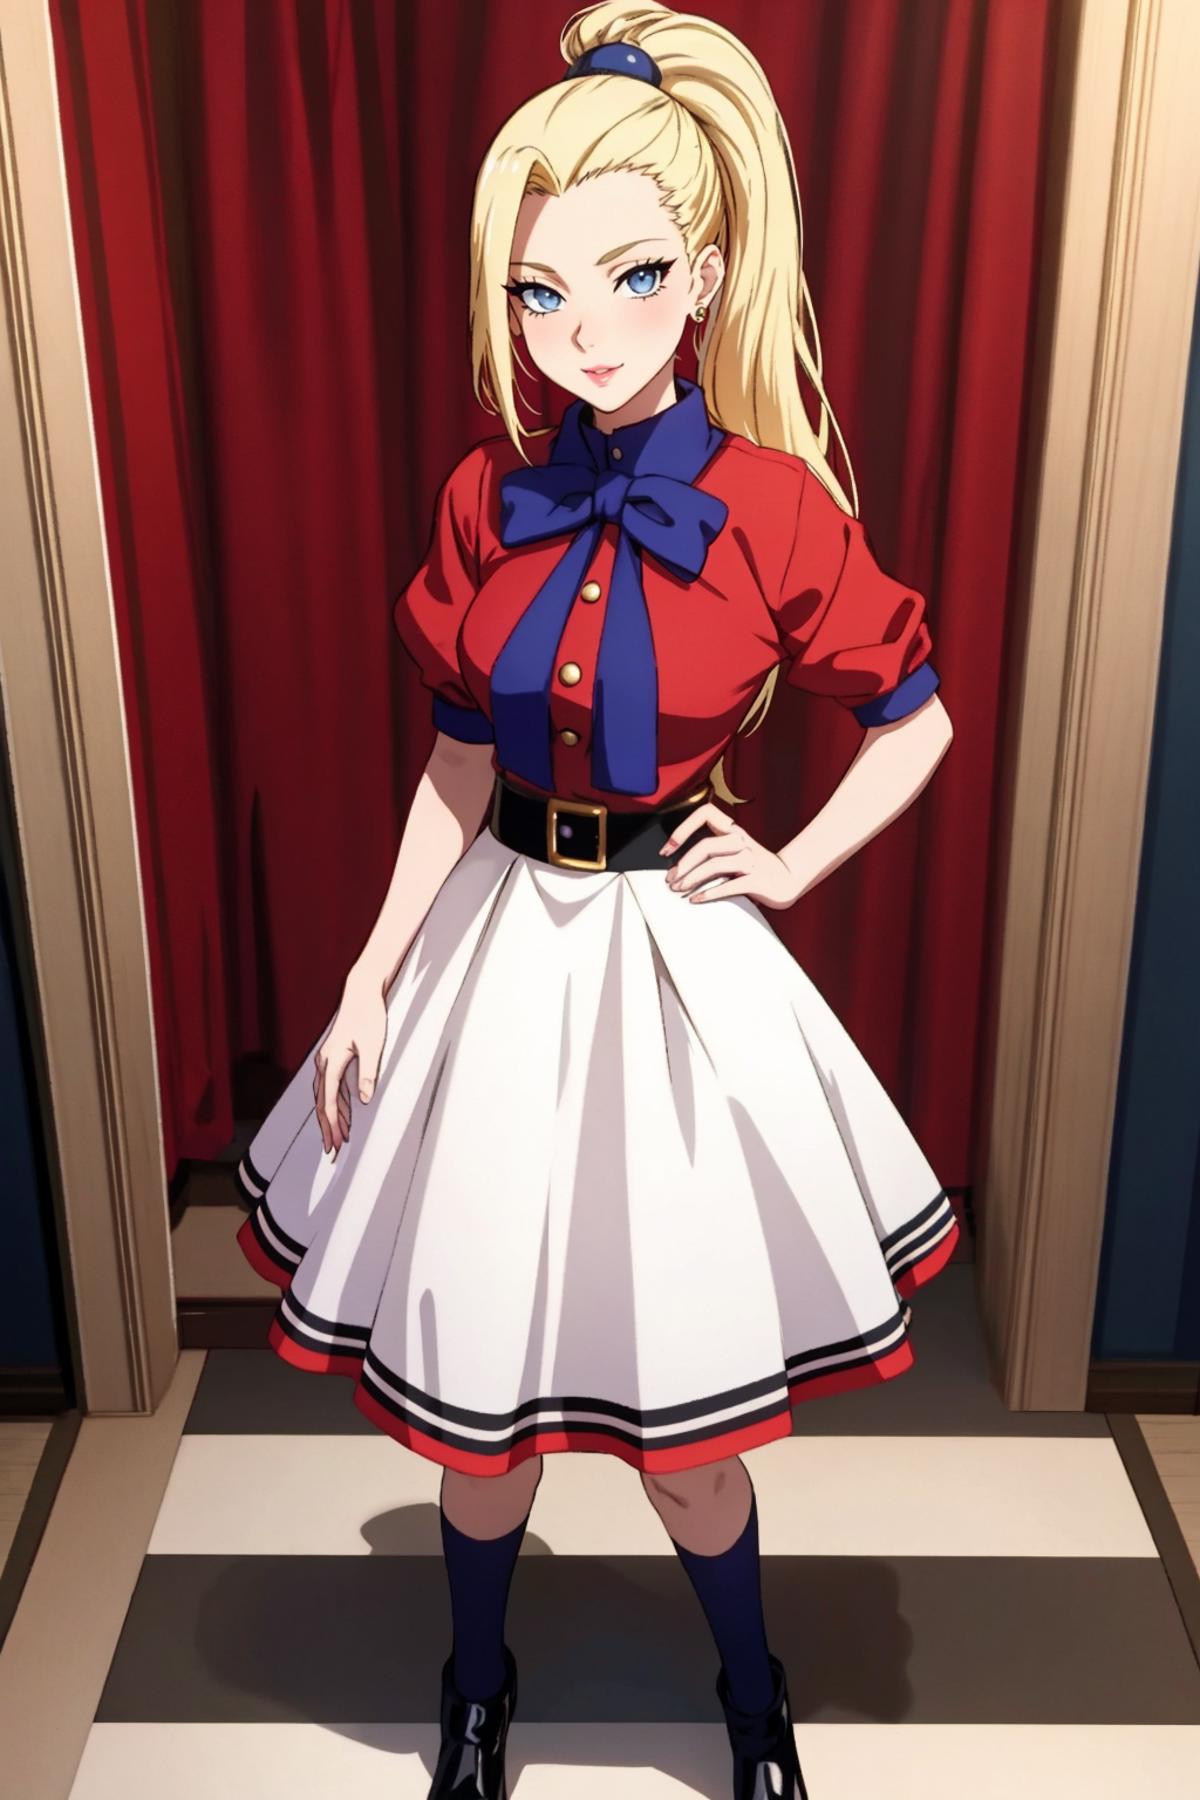 Anime girl wearing a red dress with a blue bow and white skirt.